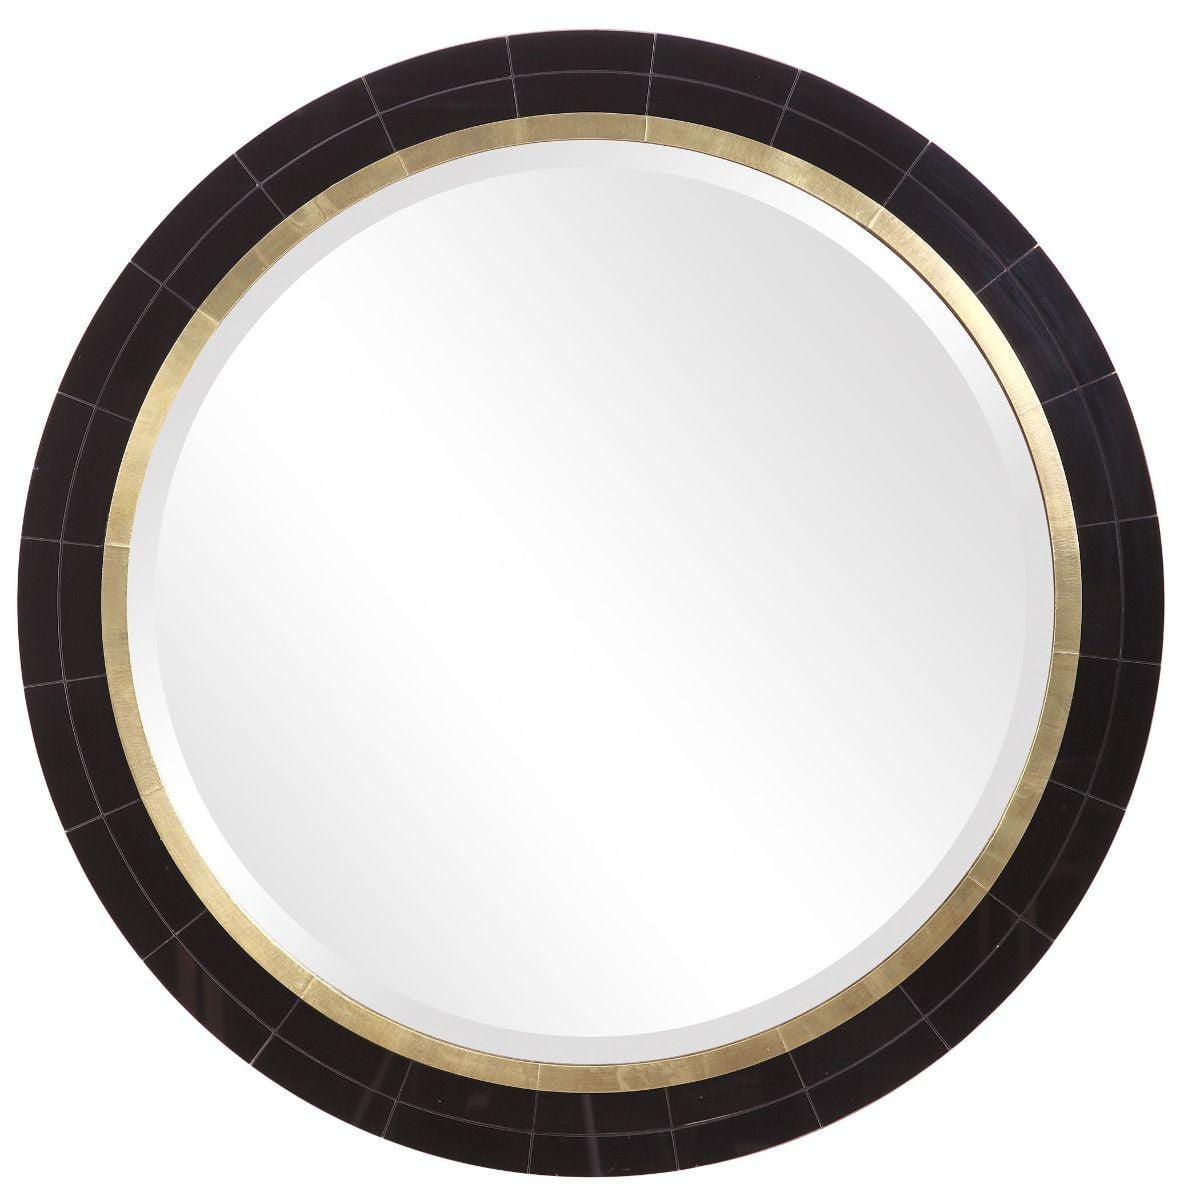 Contemporary Round Wood & Metal Beveled Wall Mirror in Black/Brass 36"